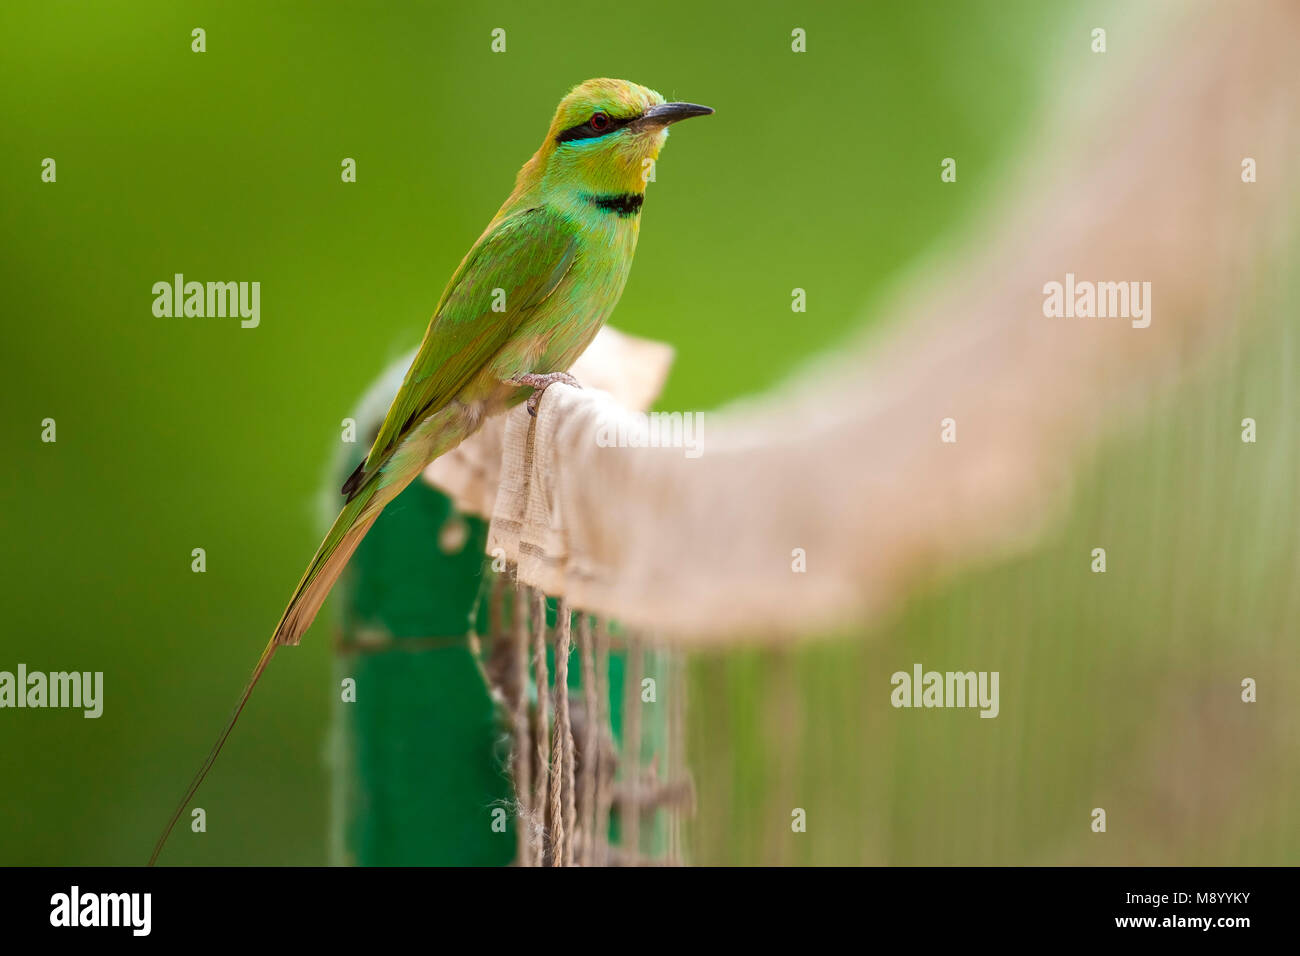 Nile Little Green Bee-eater perched on a net, Nile Valley, Egypt. April 2009. Stock Photo